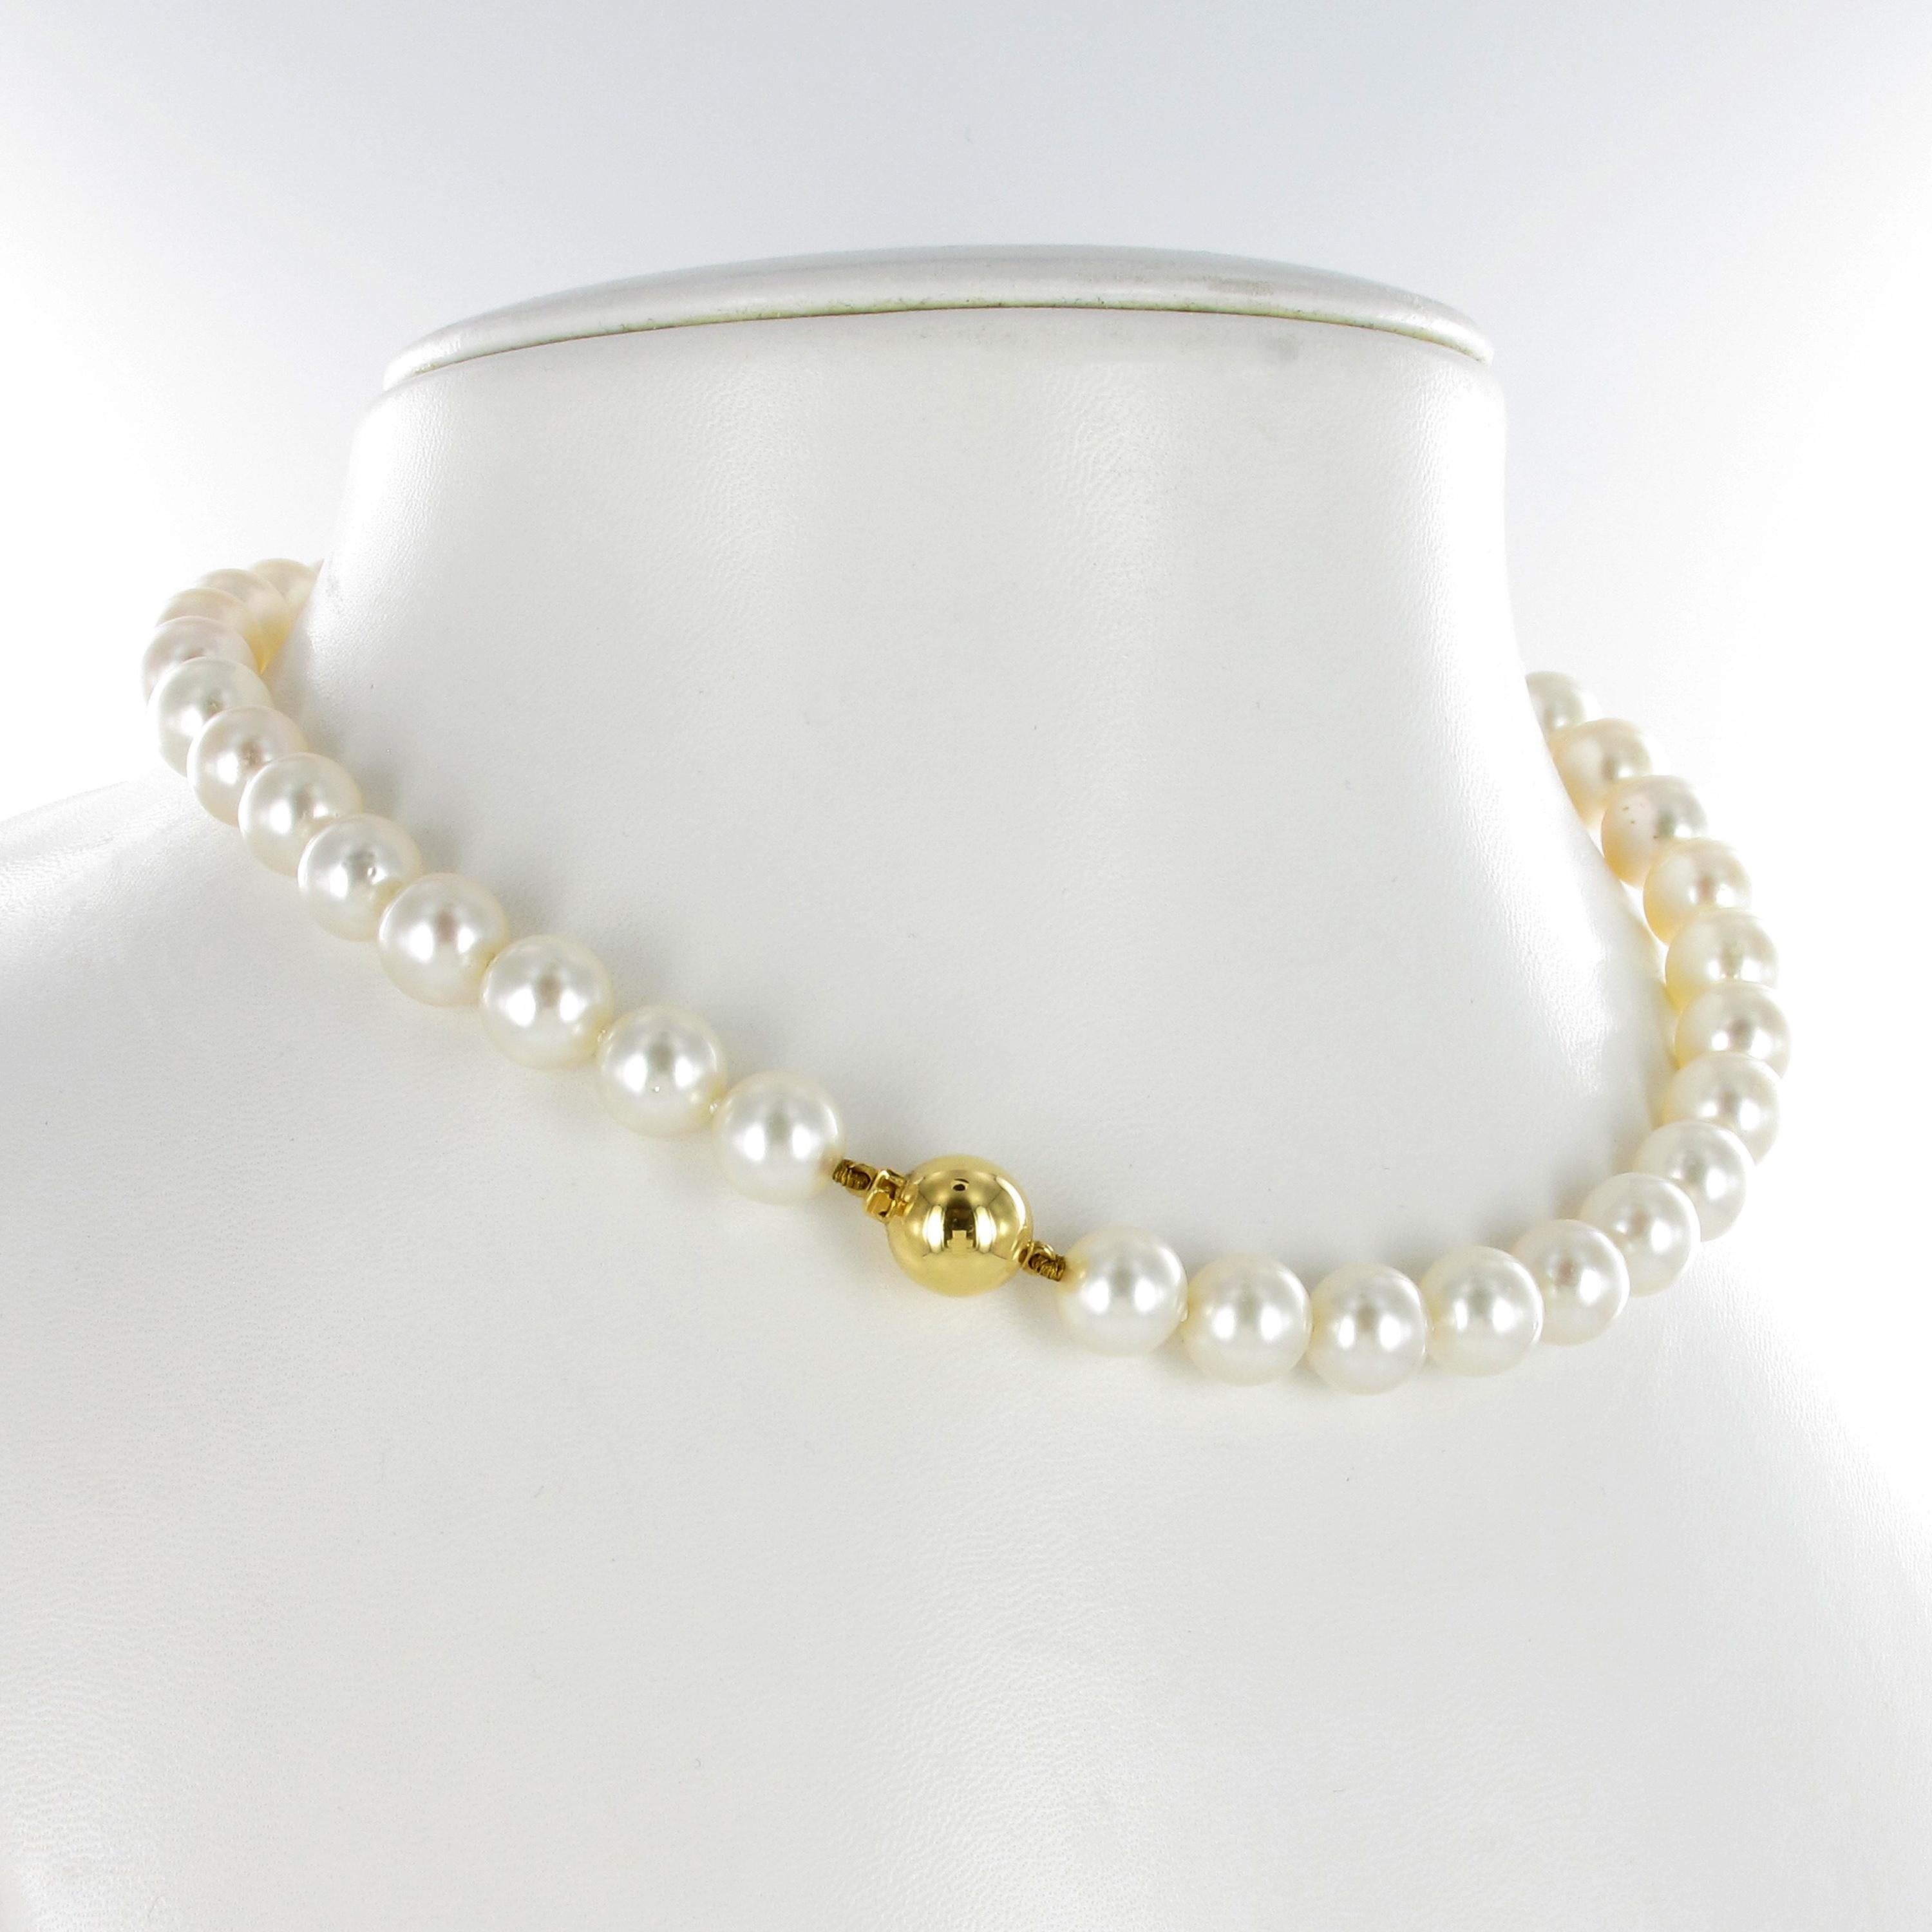 Women's or Men's White South Sea Cultured Pearl Necklace